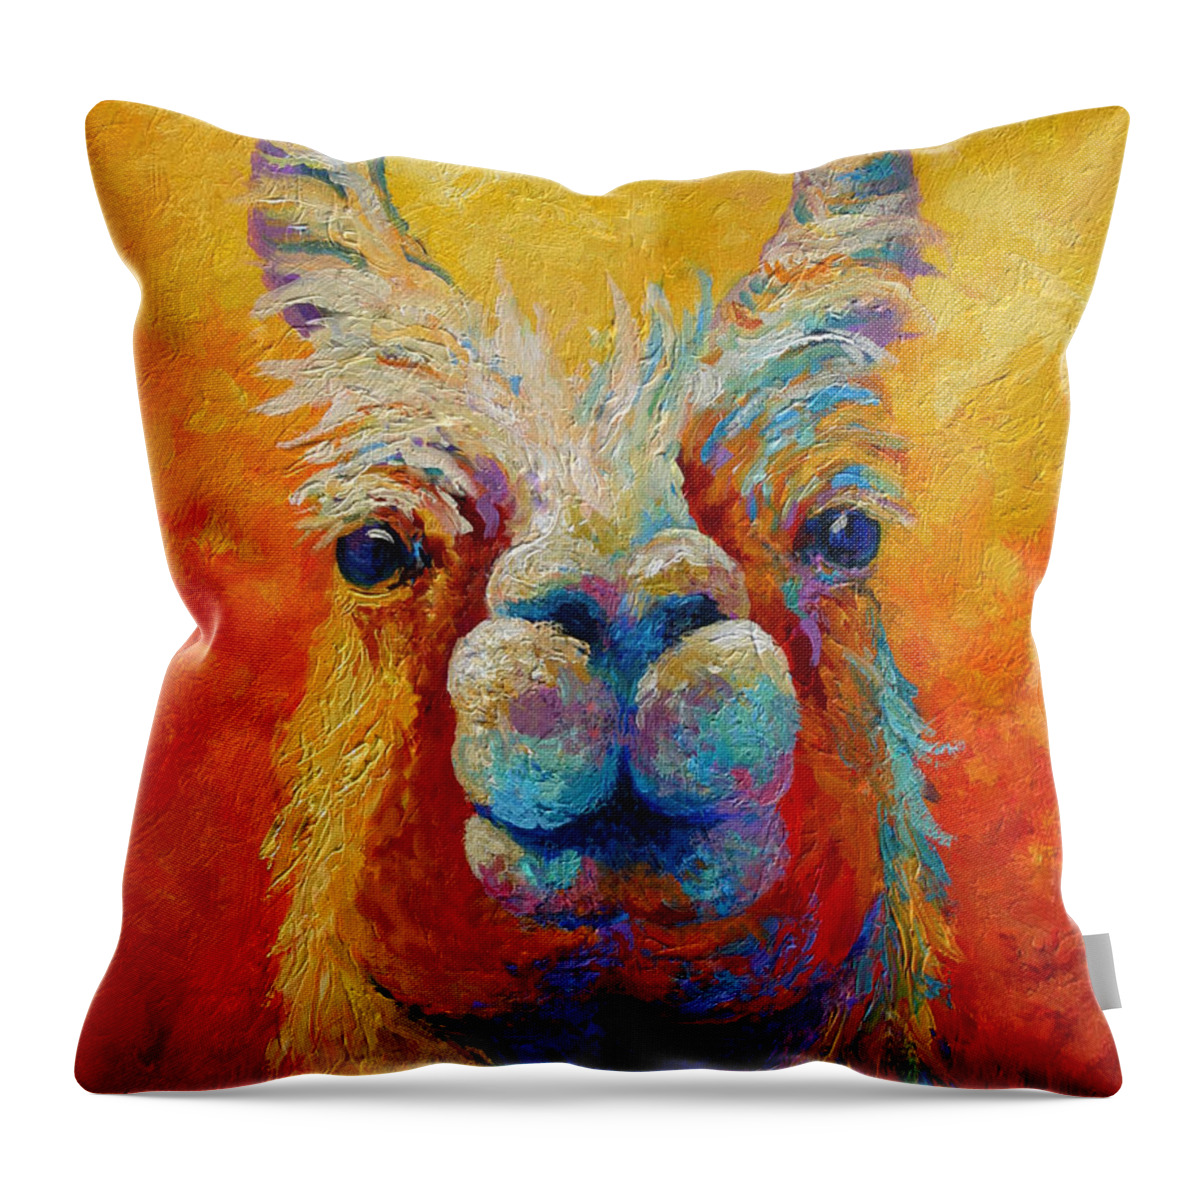 Llama Throw Pillow featuring the painting You Lookin At Me by Marion Rose